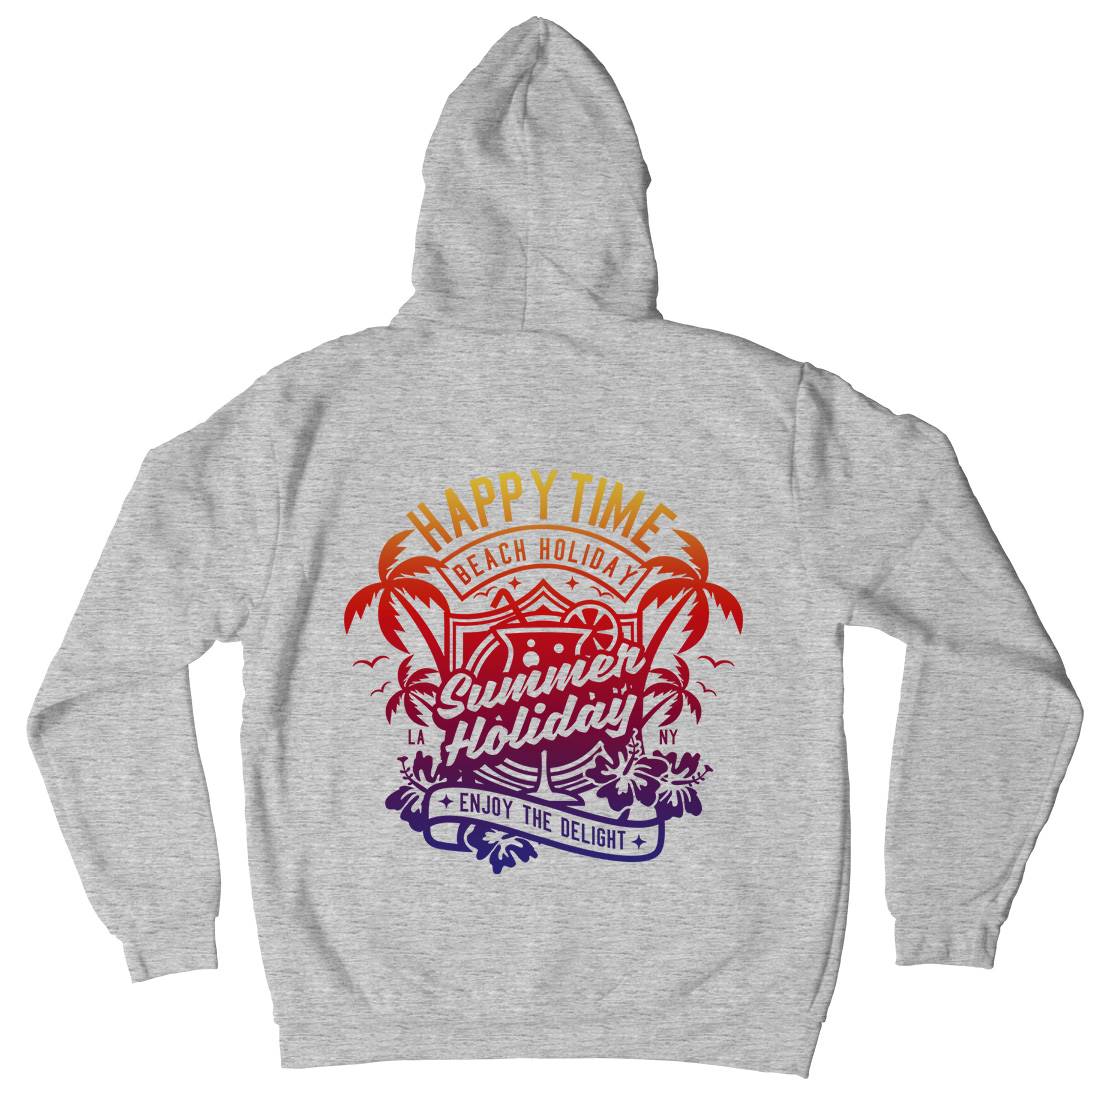 Happy Time Kids Crew Neck Hoodie Surf A238